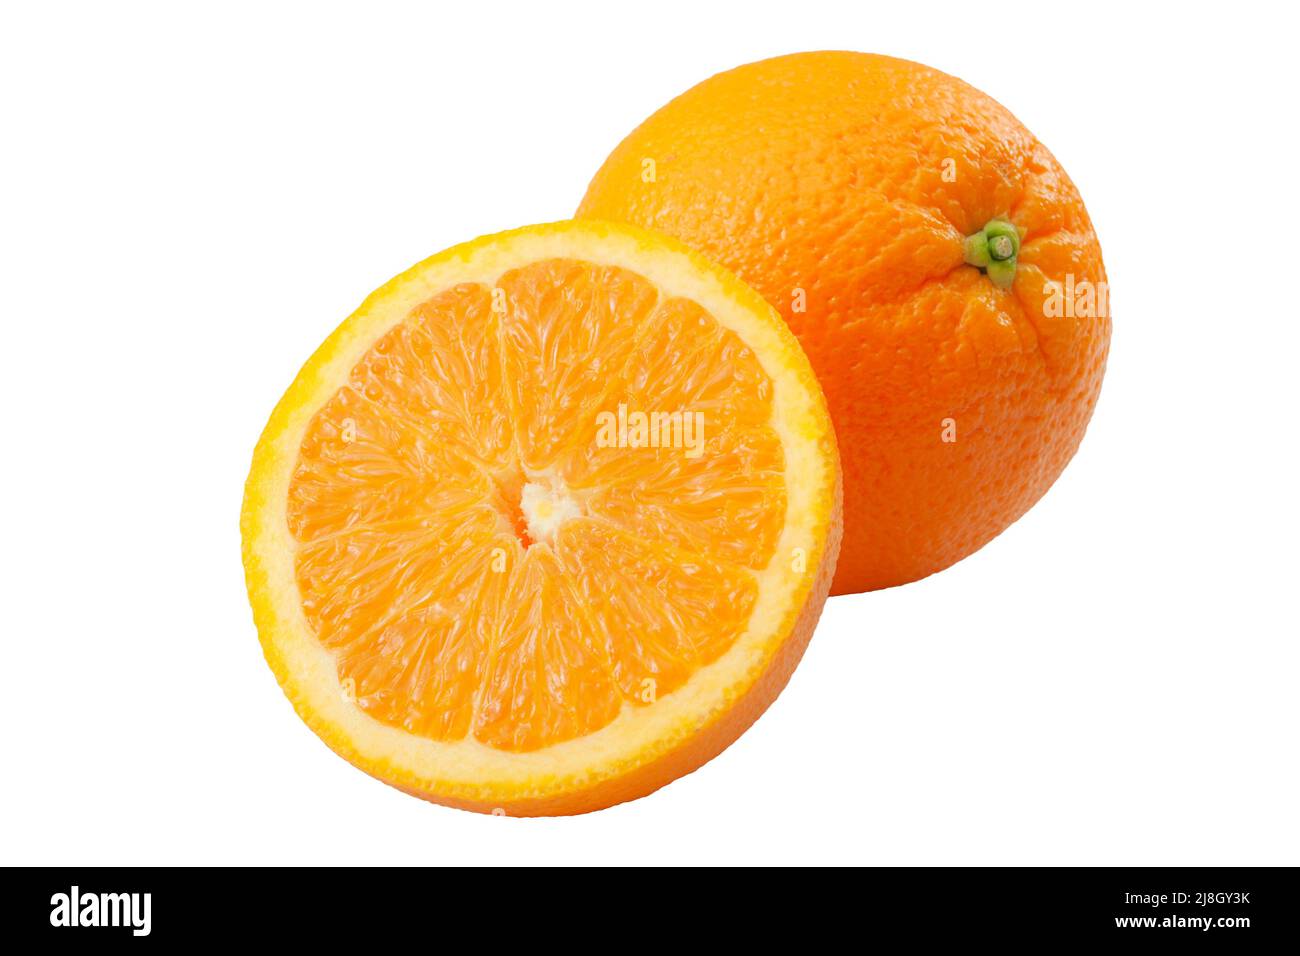 Citrus fruits high in vitamin C and refreshing summer juice concept theme with a full orange and one sliced in half isolated on white background and a Stock Photo